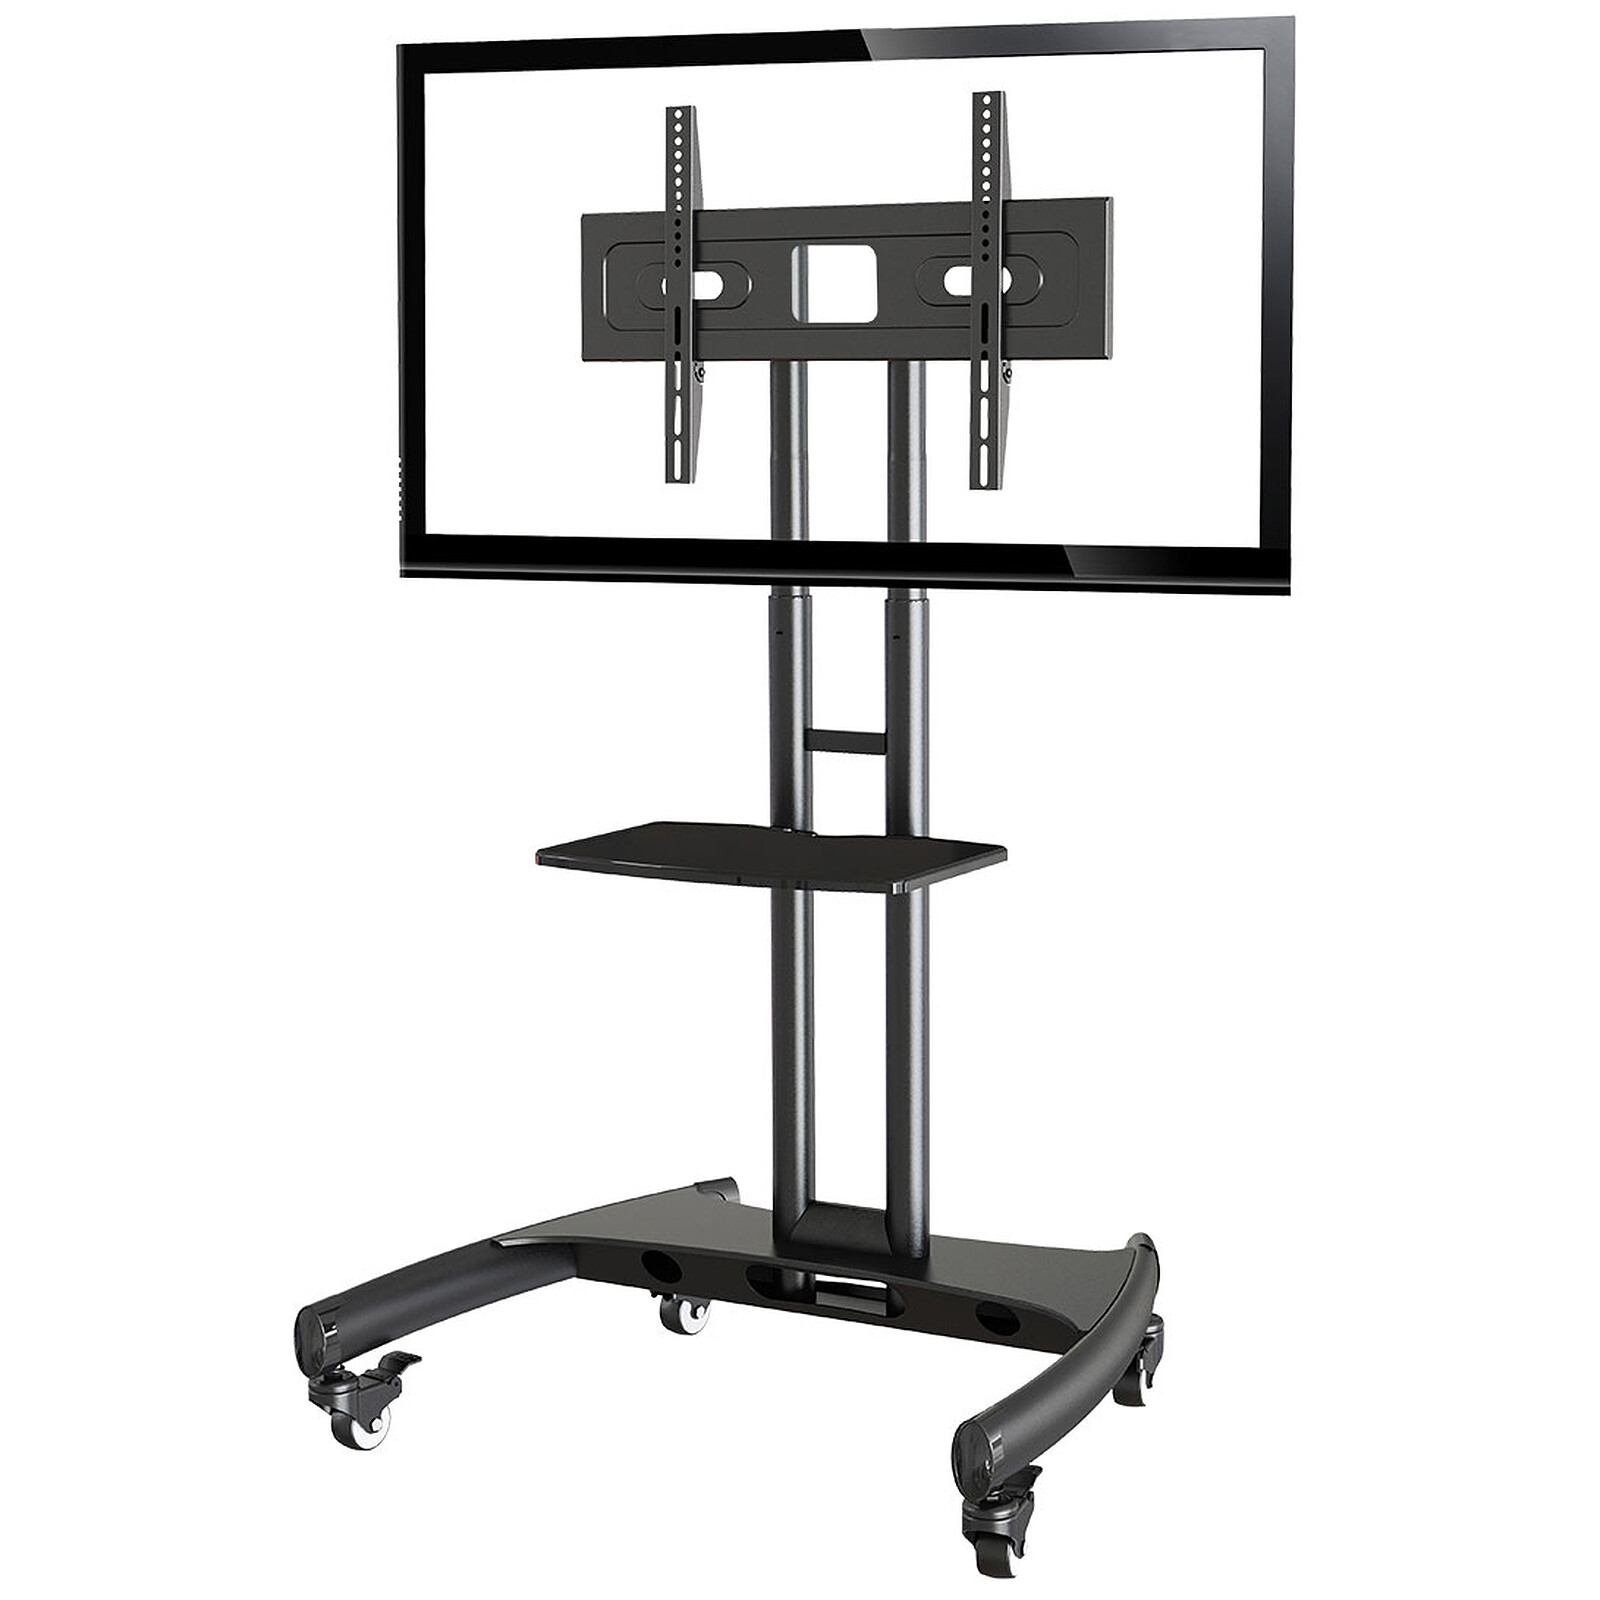 Sonorous Professional PR 2000 Black - TV stand - LDLC 3-year warranty